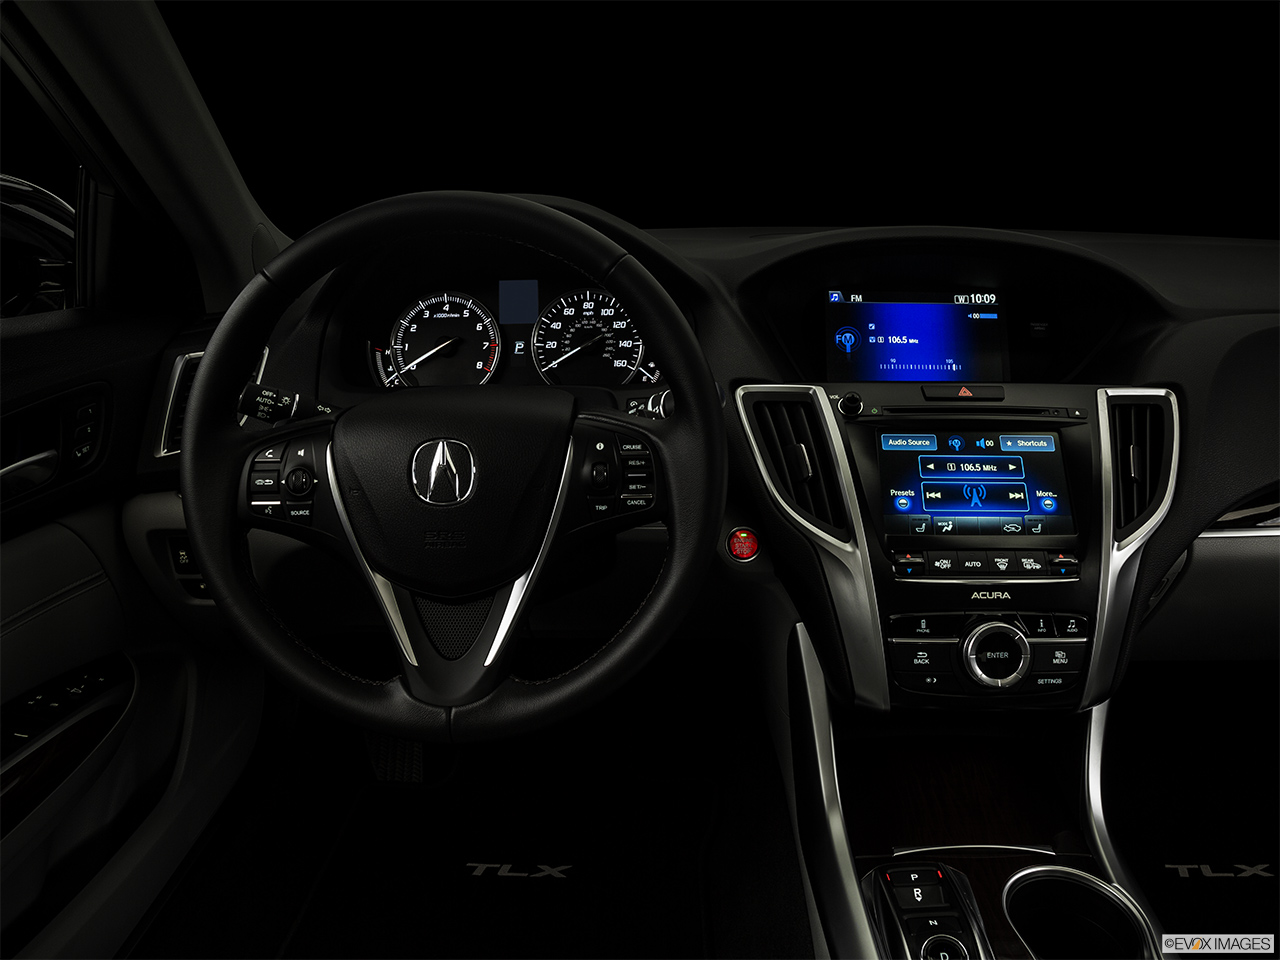 2015 Acura TLX 3.5 V-6 9-AT P-AWS Centered wide dash shot - "night" shot. 